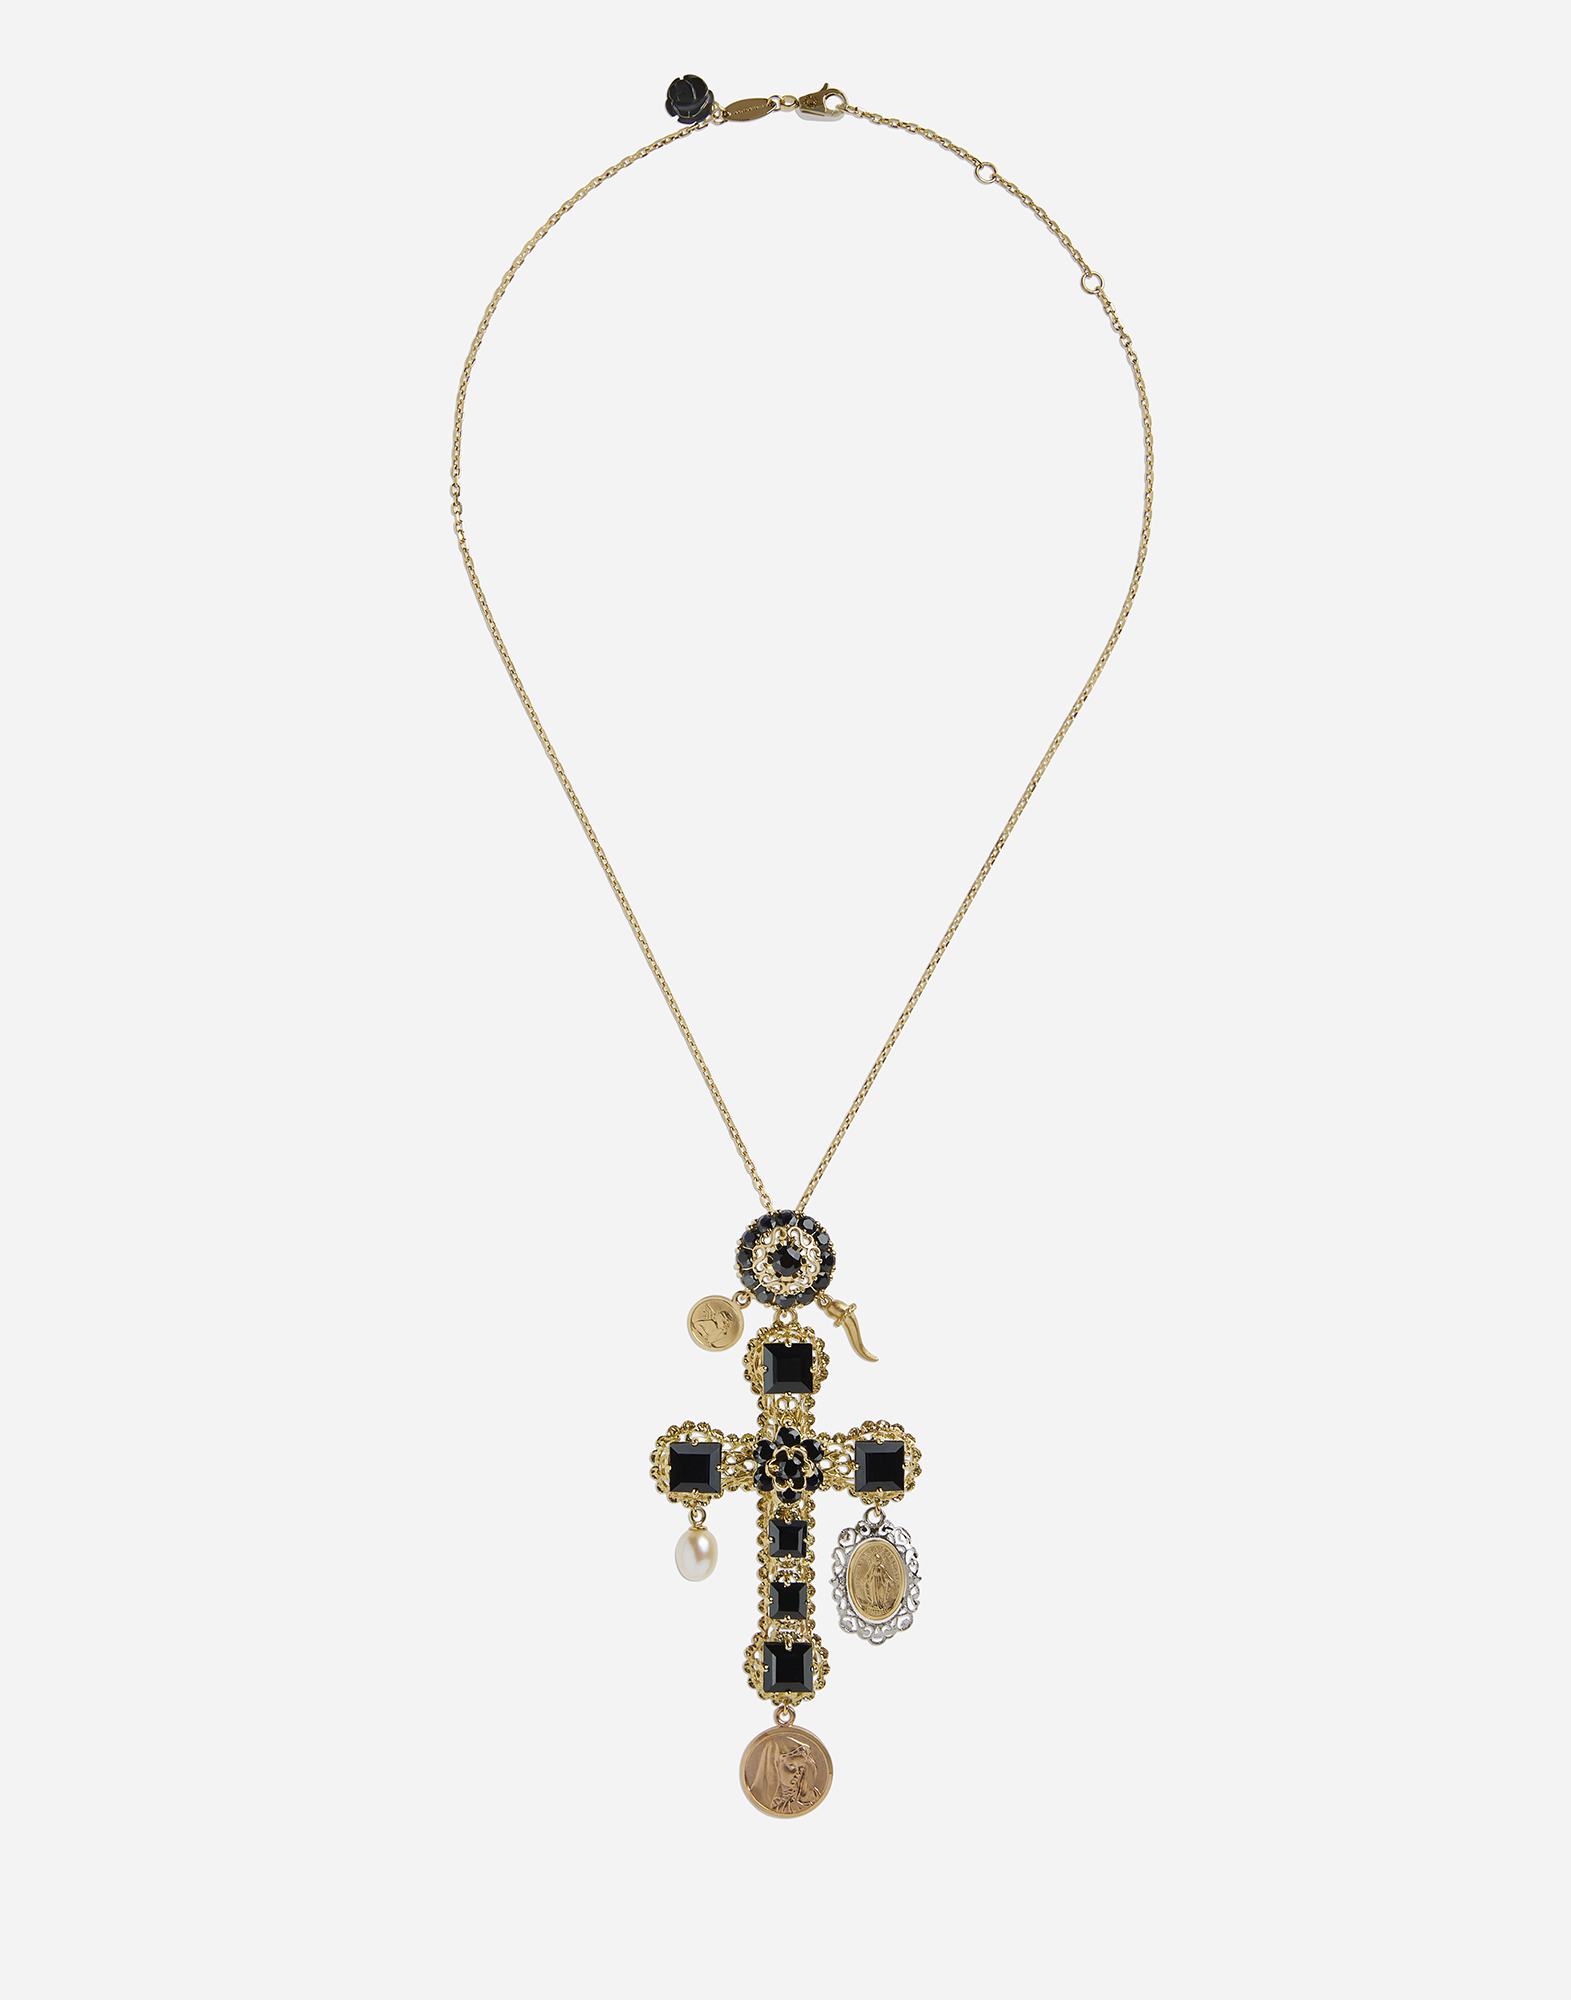 Necklace with sapphire cross charm in Gold/Black